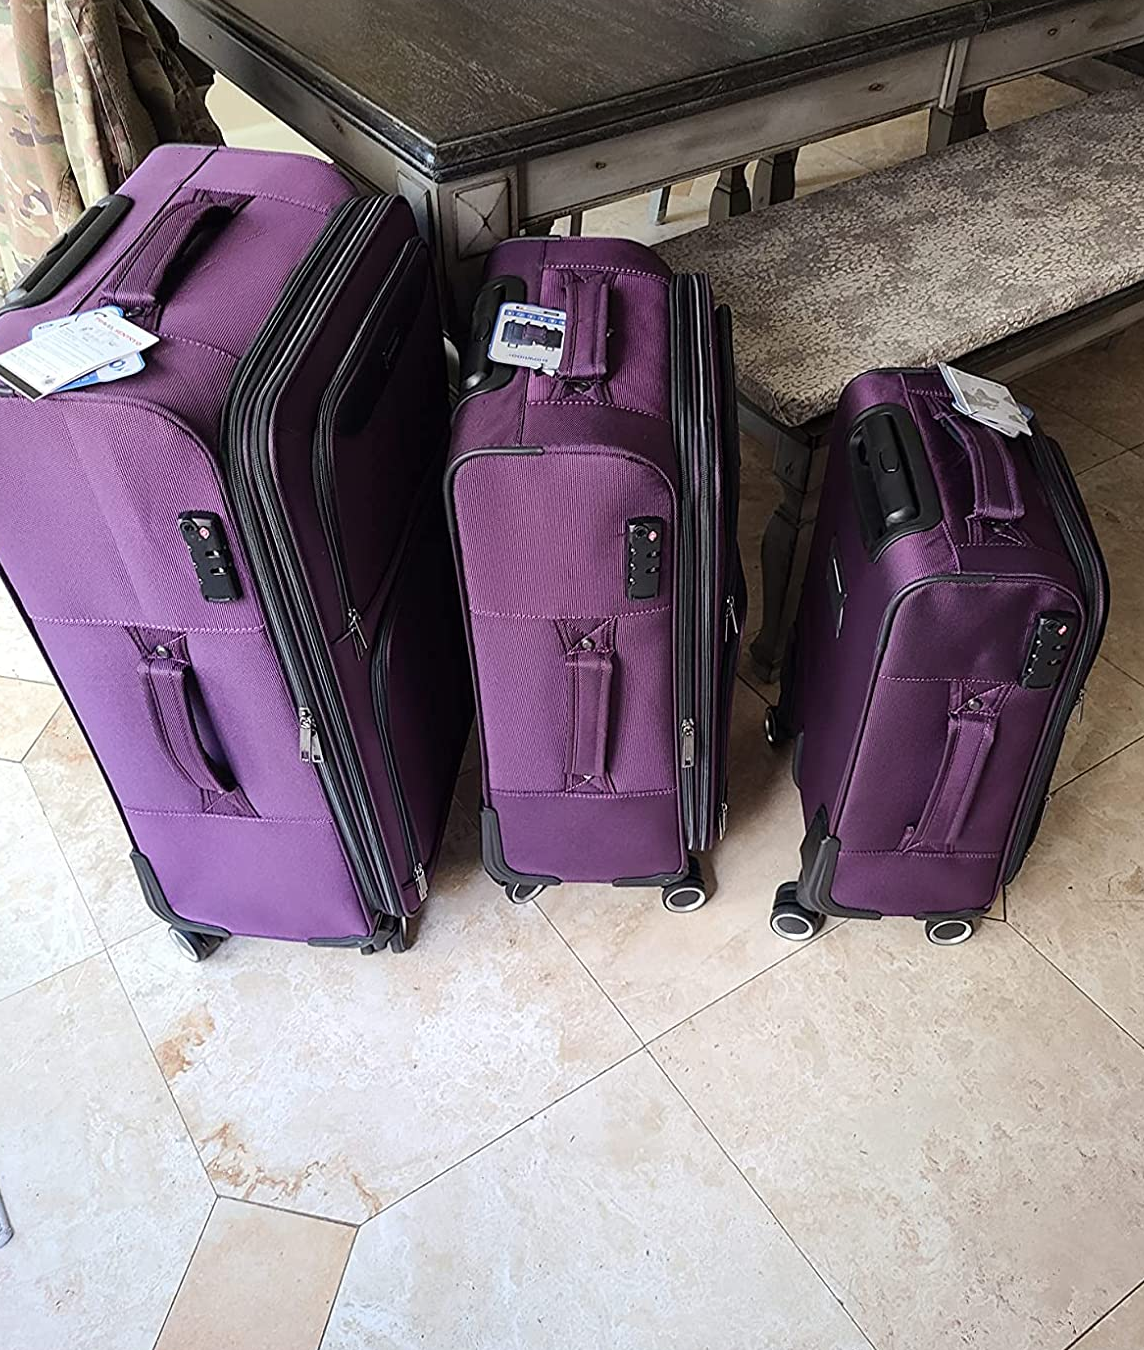 6-piece luggage and bags soft luggage bag sets